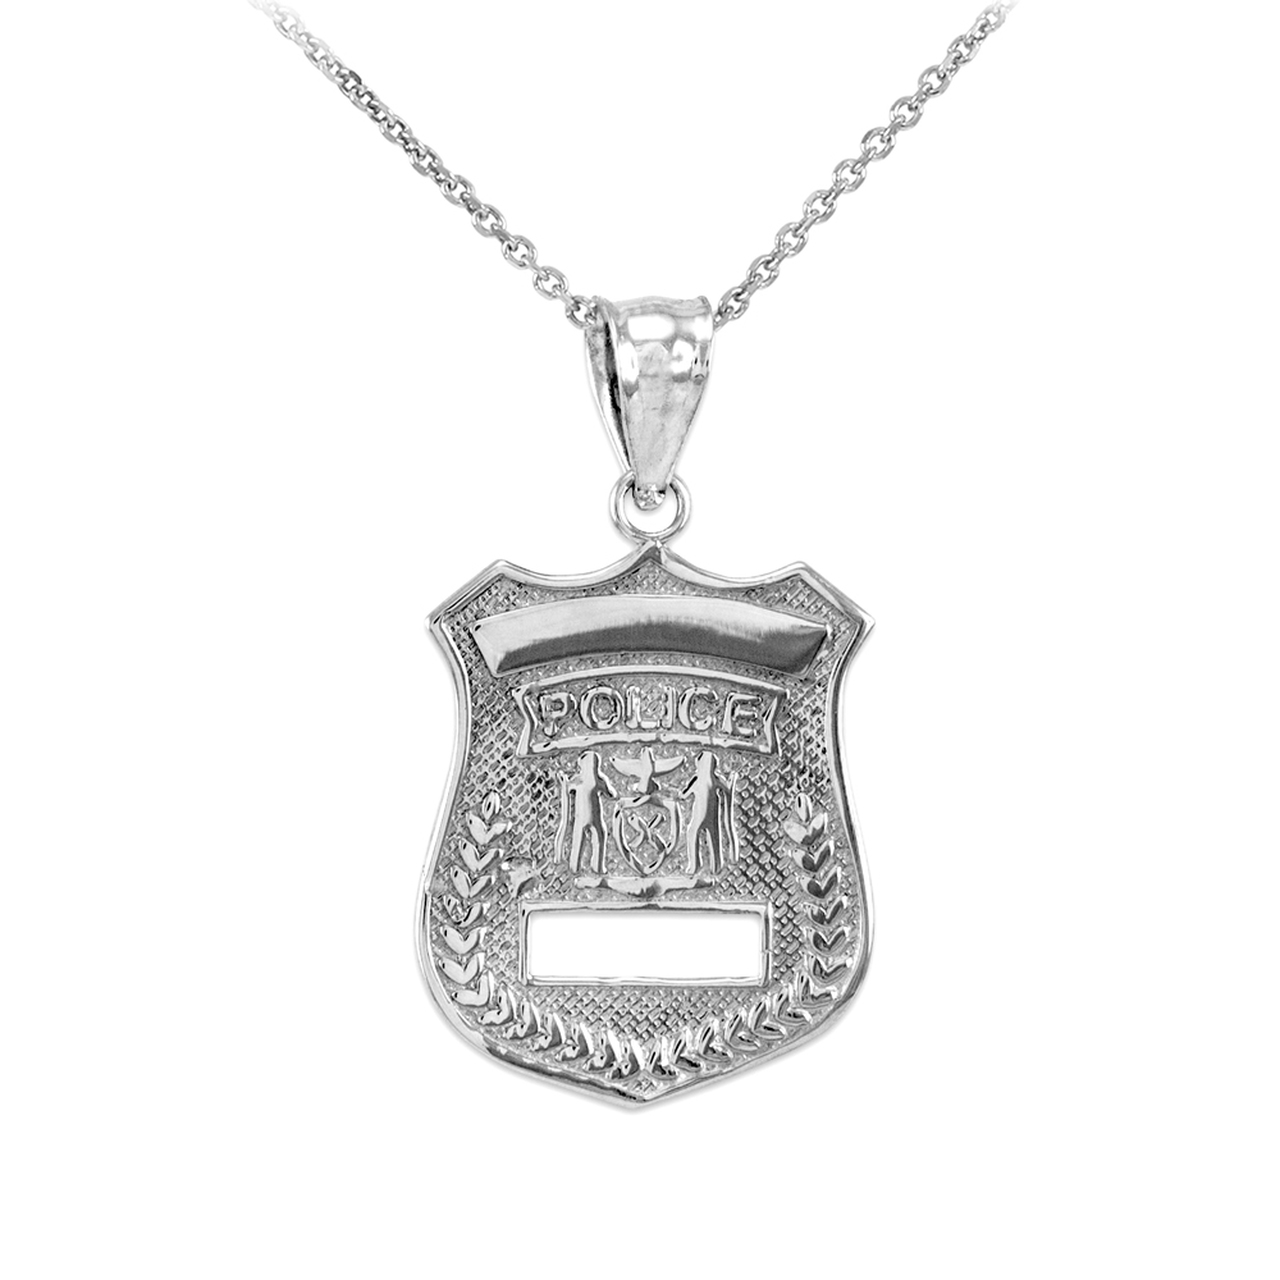 police necklace